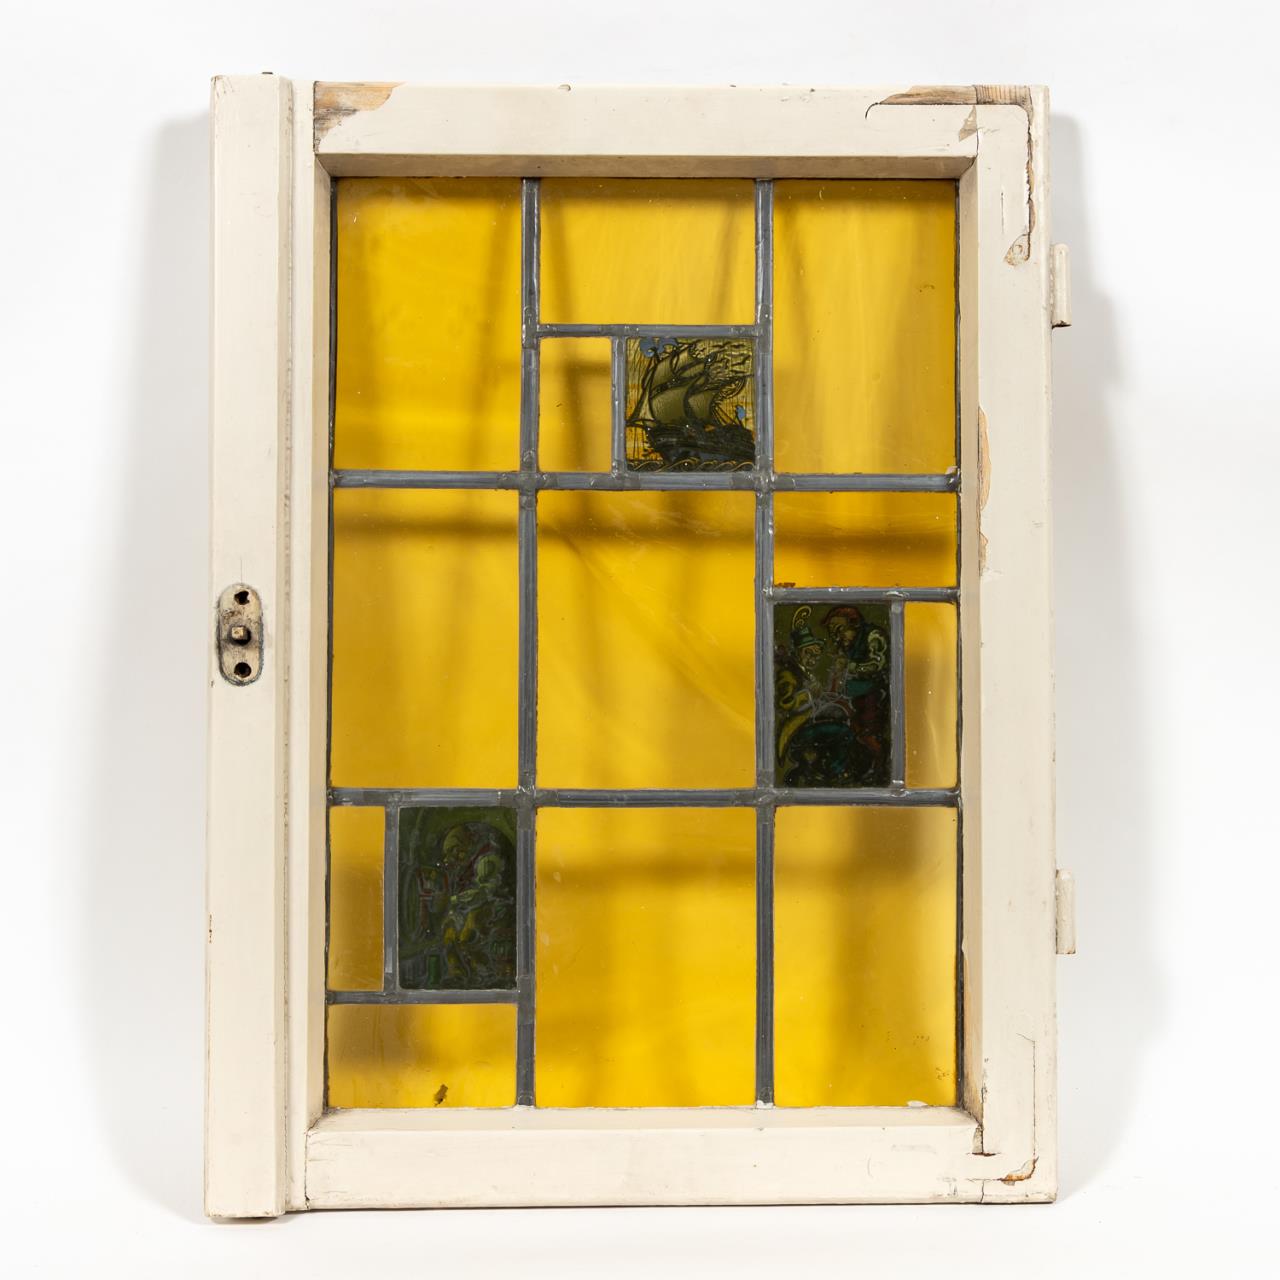 BRITISH LEADED GLASS WINDOW WITH 35a657